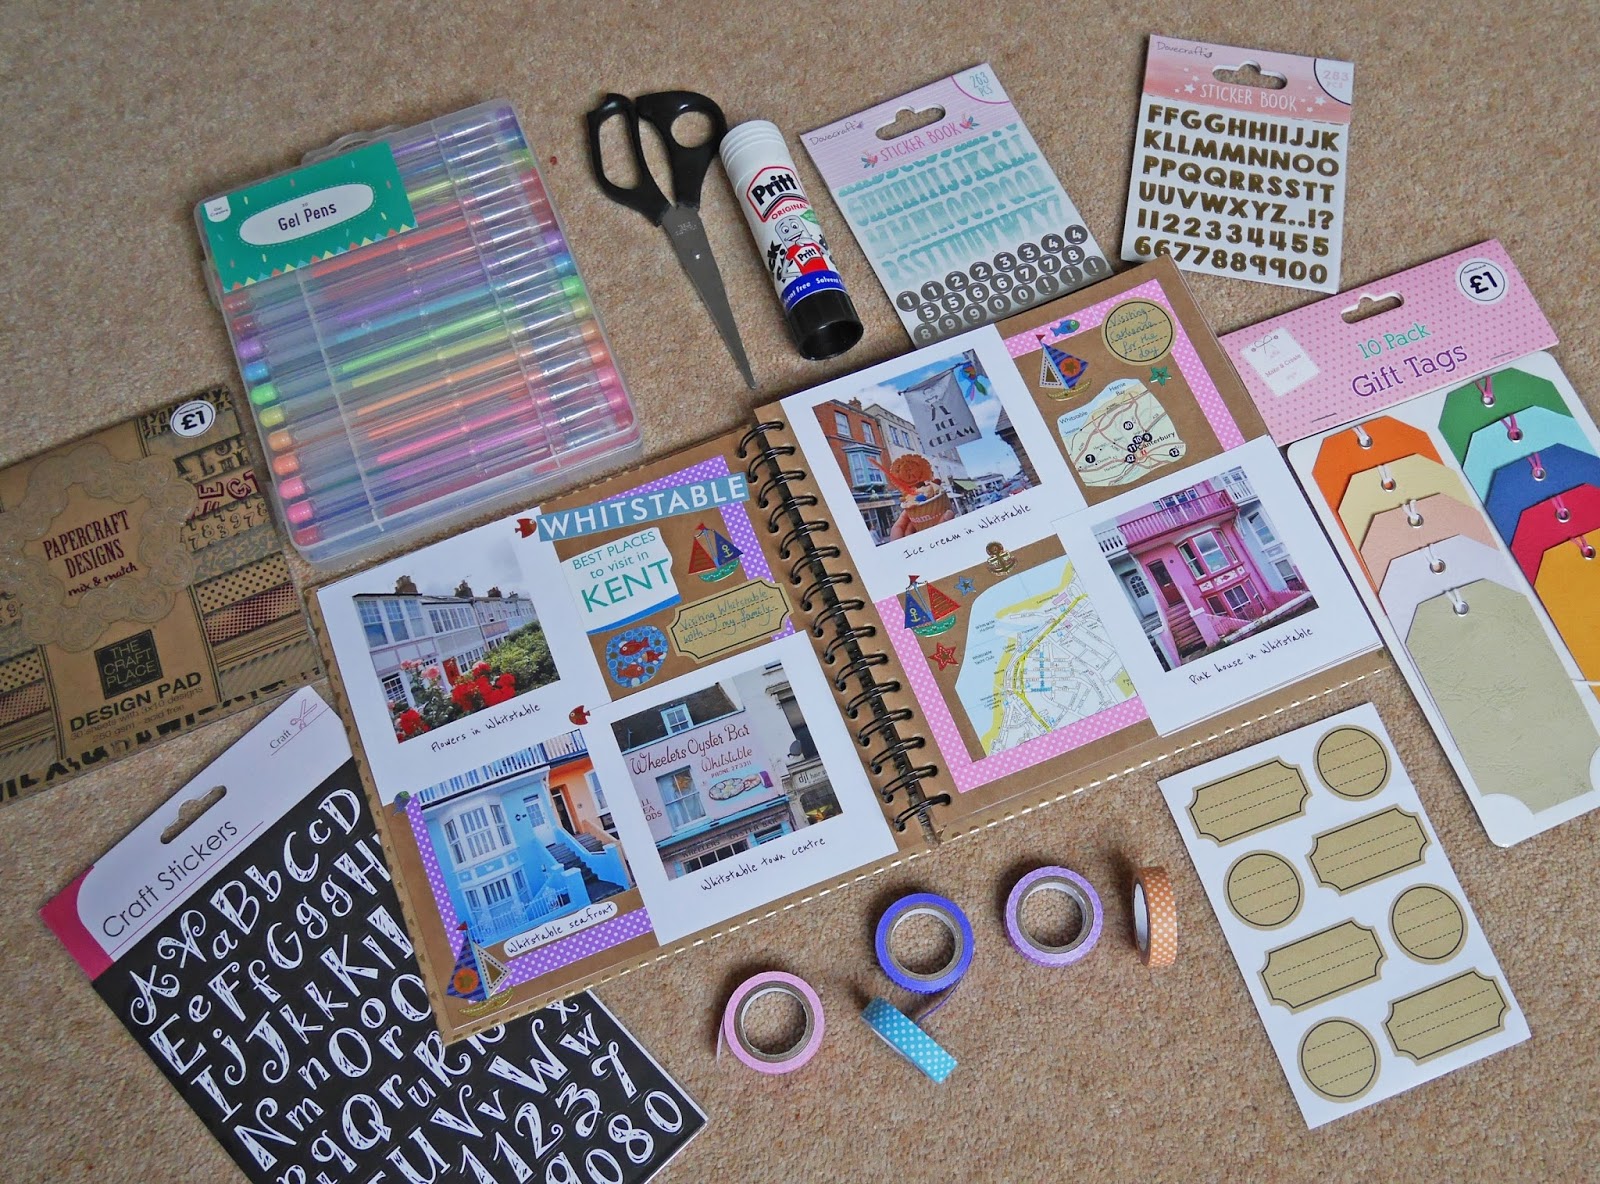 Scrapbooking starter kit for beginners - backing paper, stickers, washi tape and more